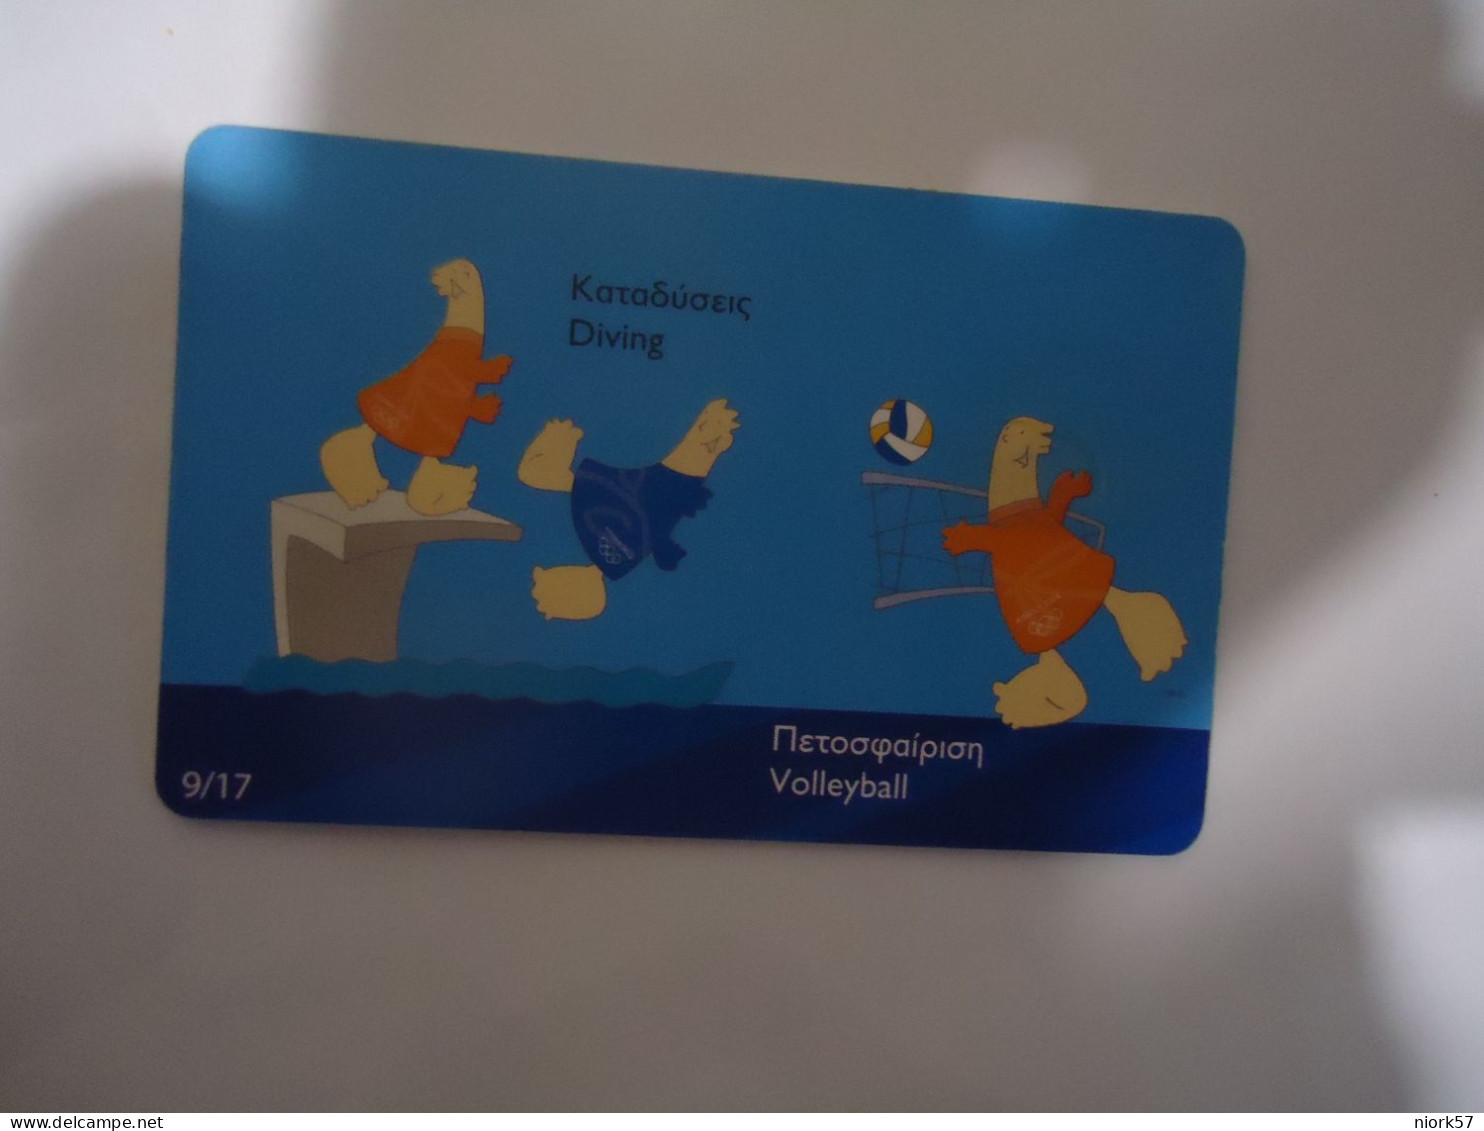 GREECE    USED   CARDS MASCOTS  OLYMPIC GAMES  ATHENS 2004 - Griechenland